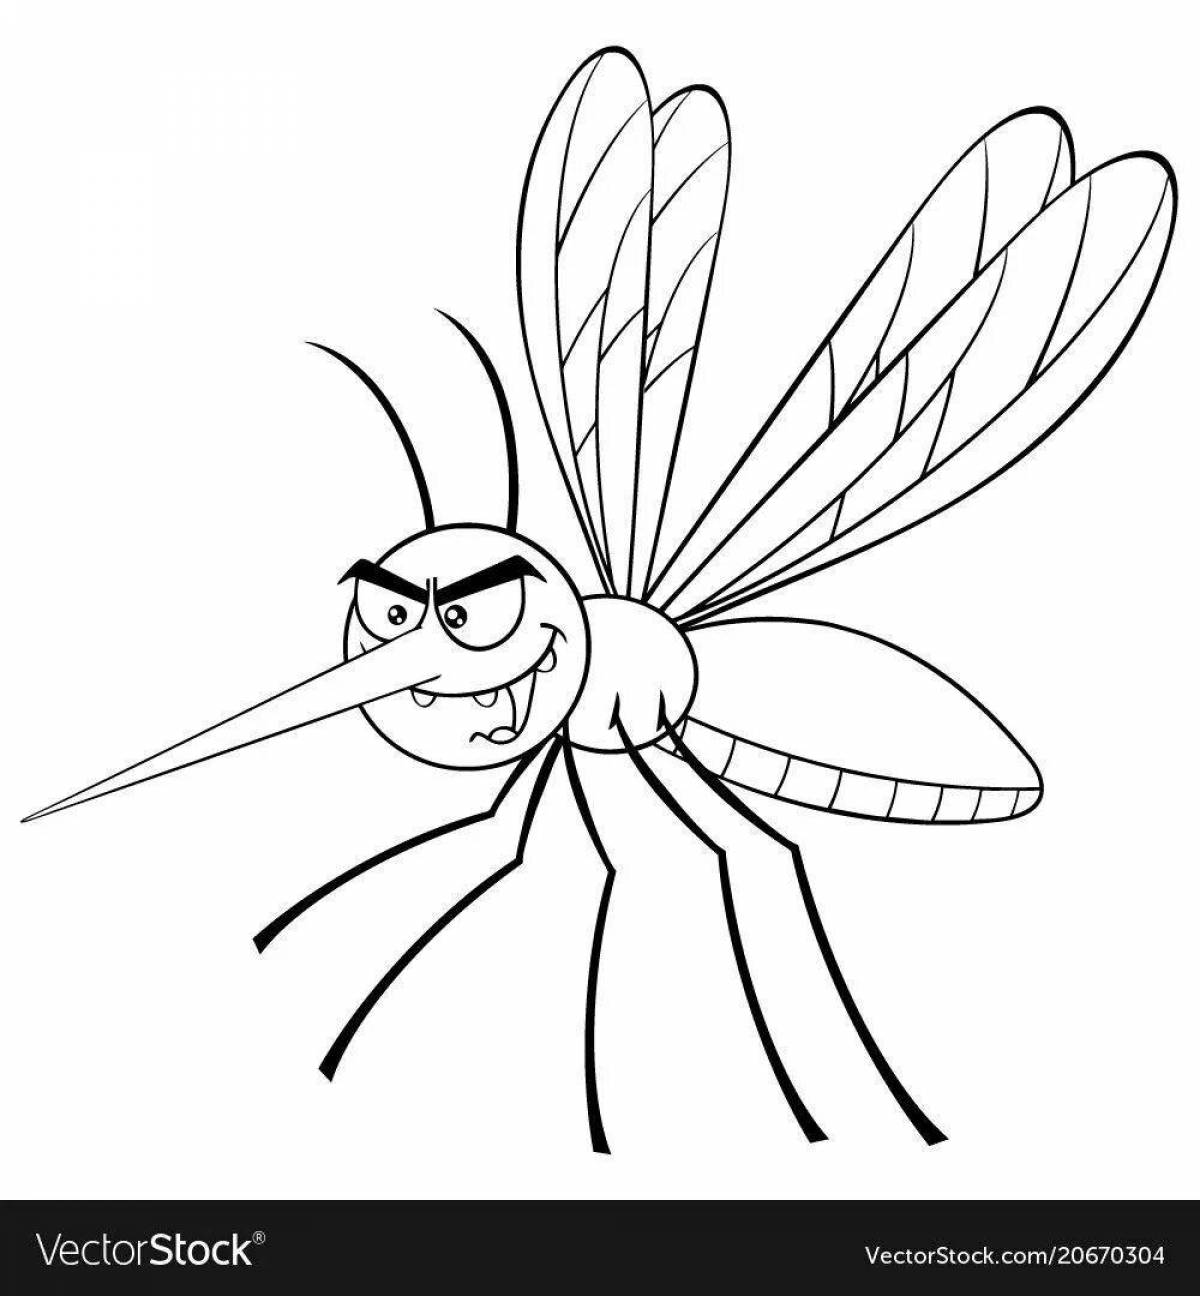 Merry mosquito coloring book